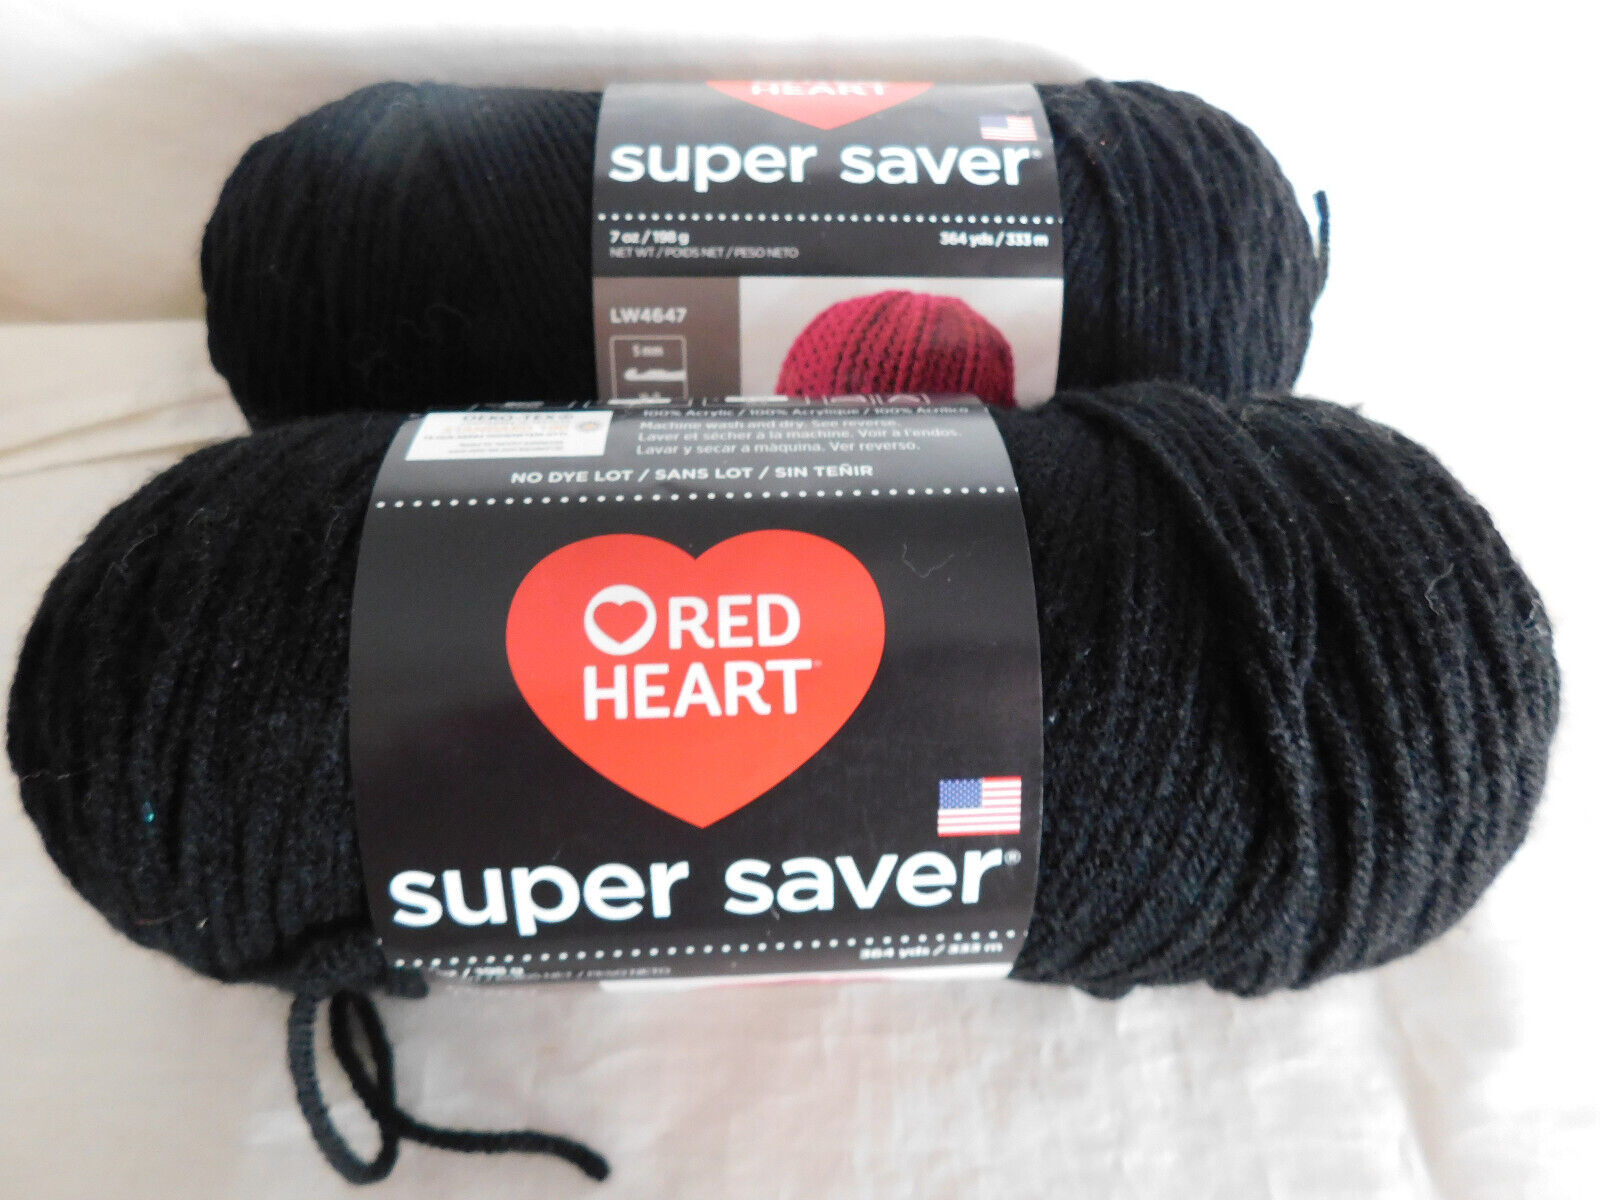 Primary image for Red Heart Super Saver Black dye lot 151118 lot of 2